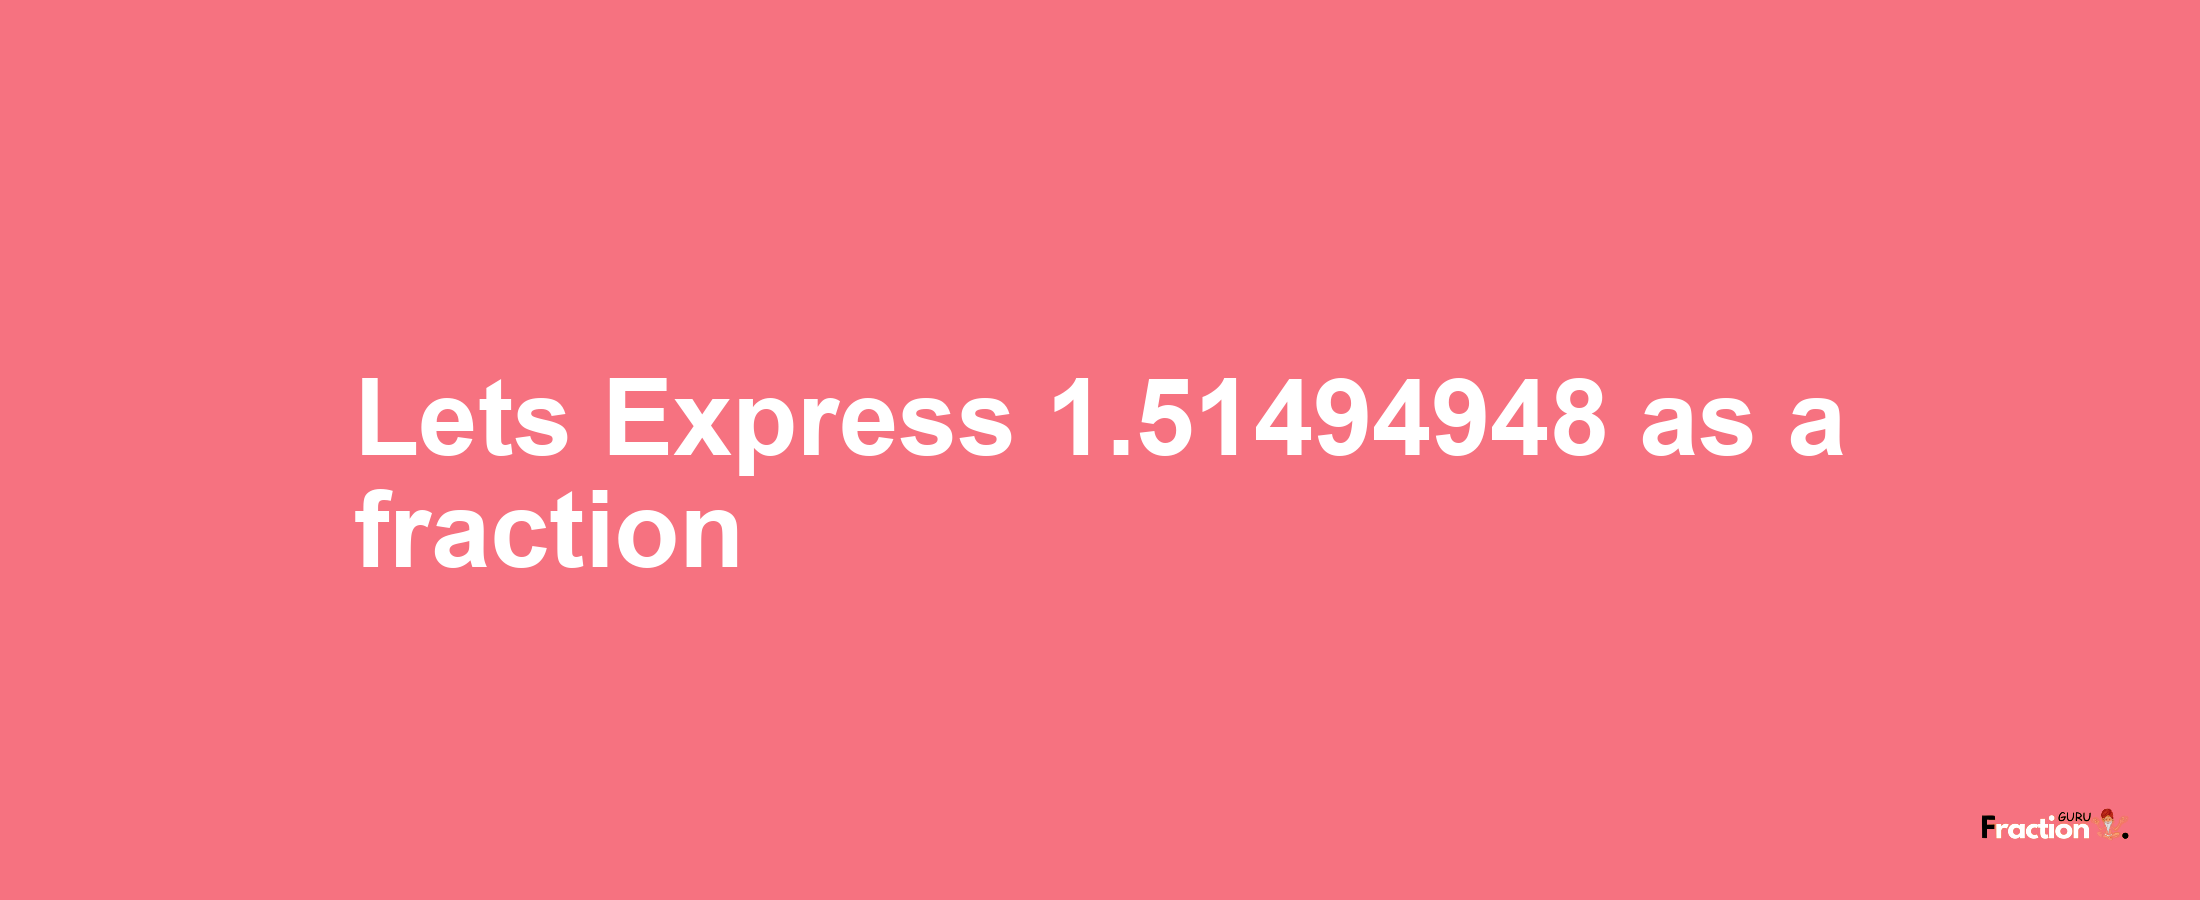 Lets Express 1.51494948 as afraction